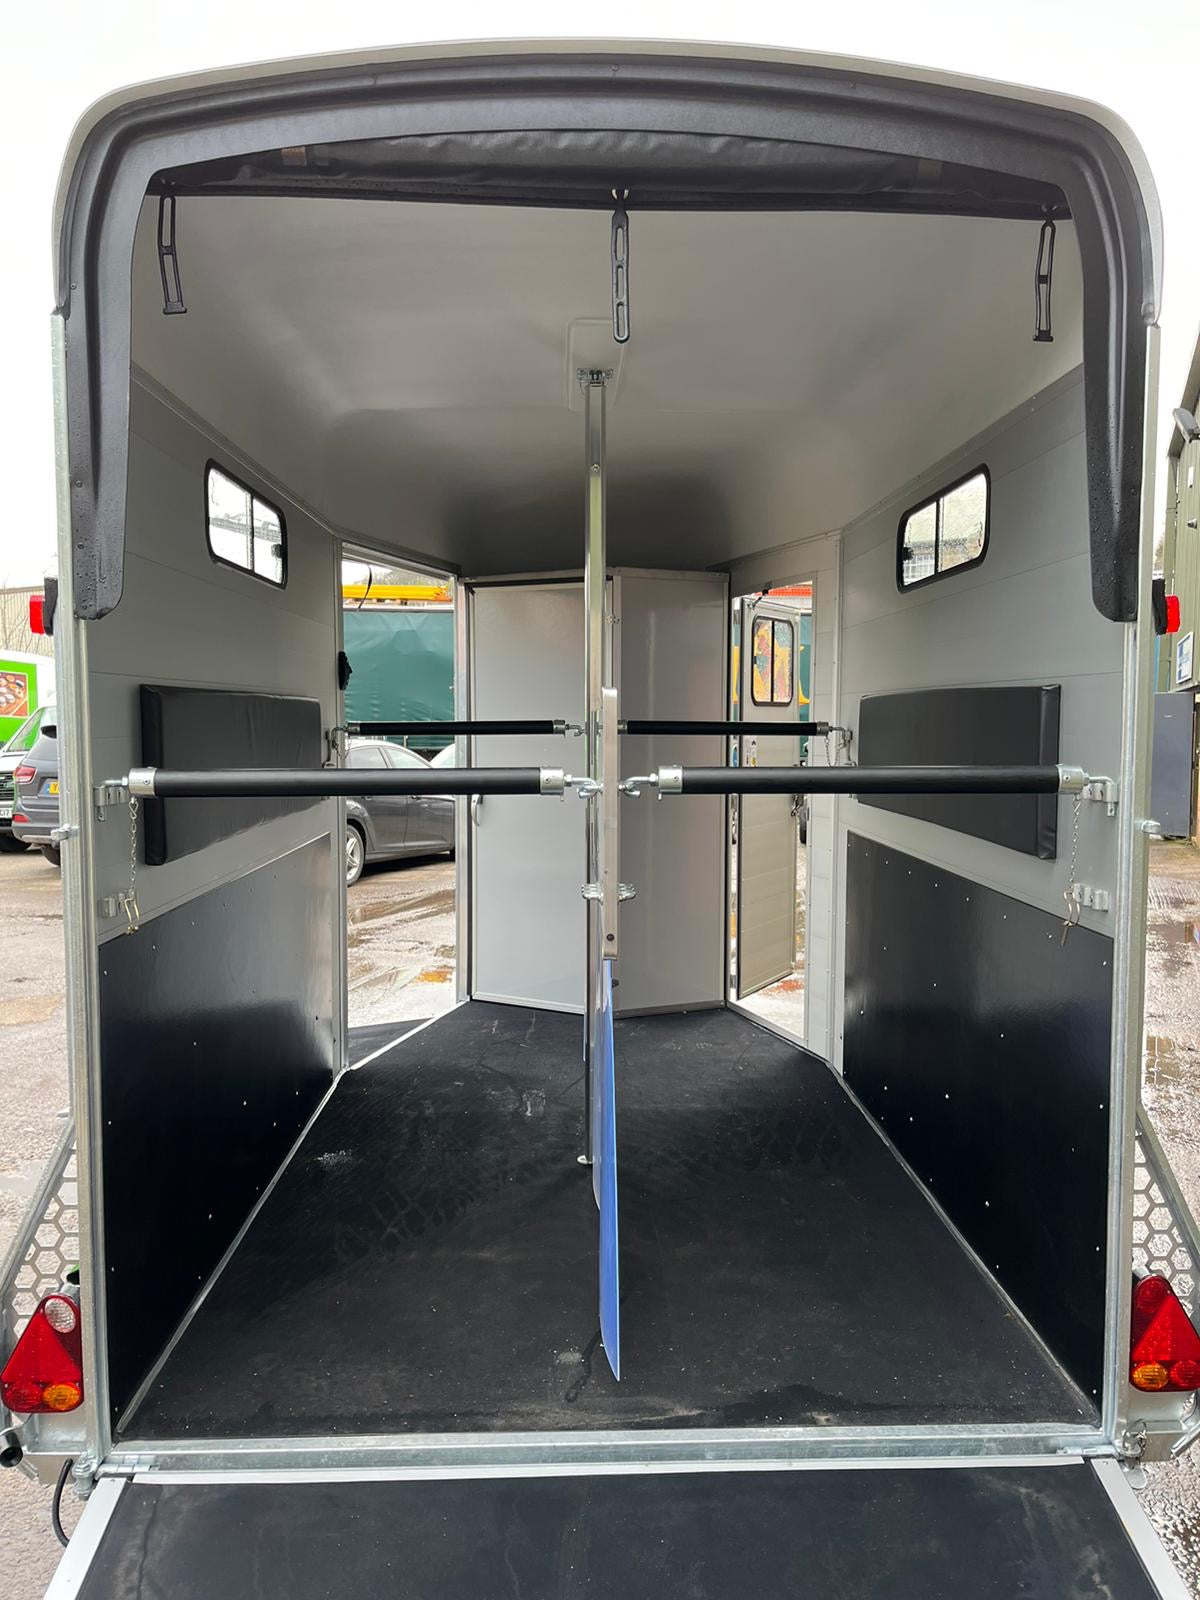 Cheval Liberté Touring Country XL with Tack Room